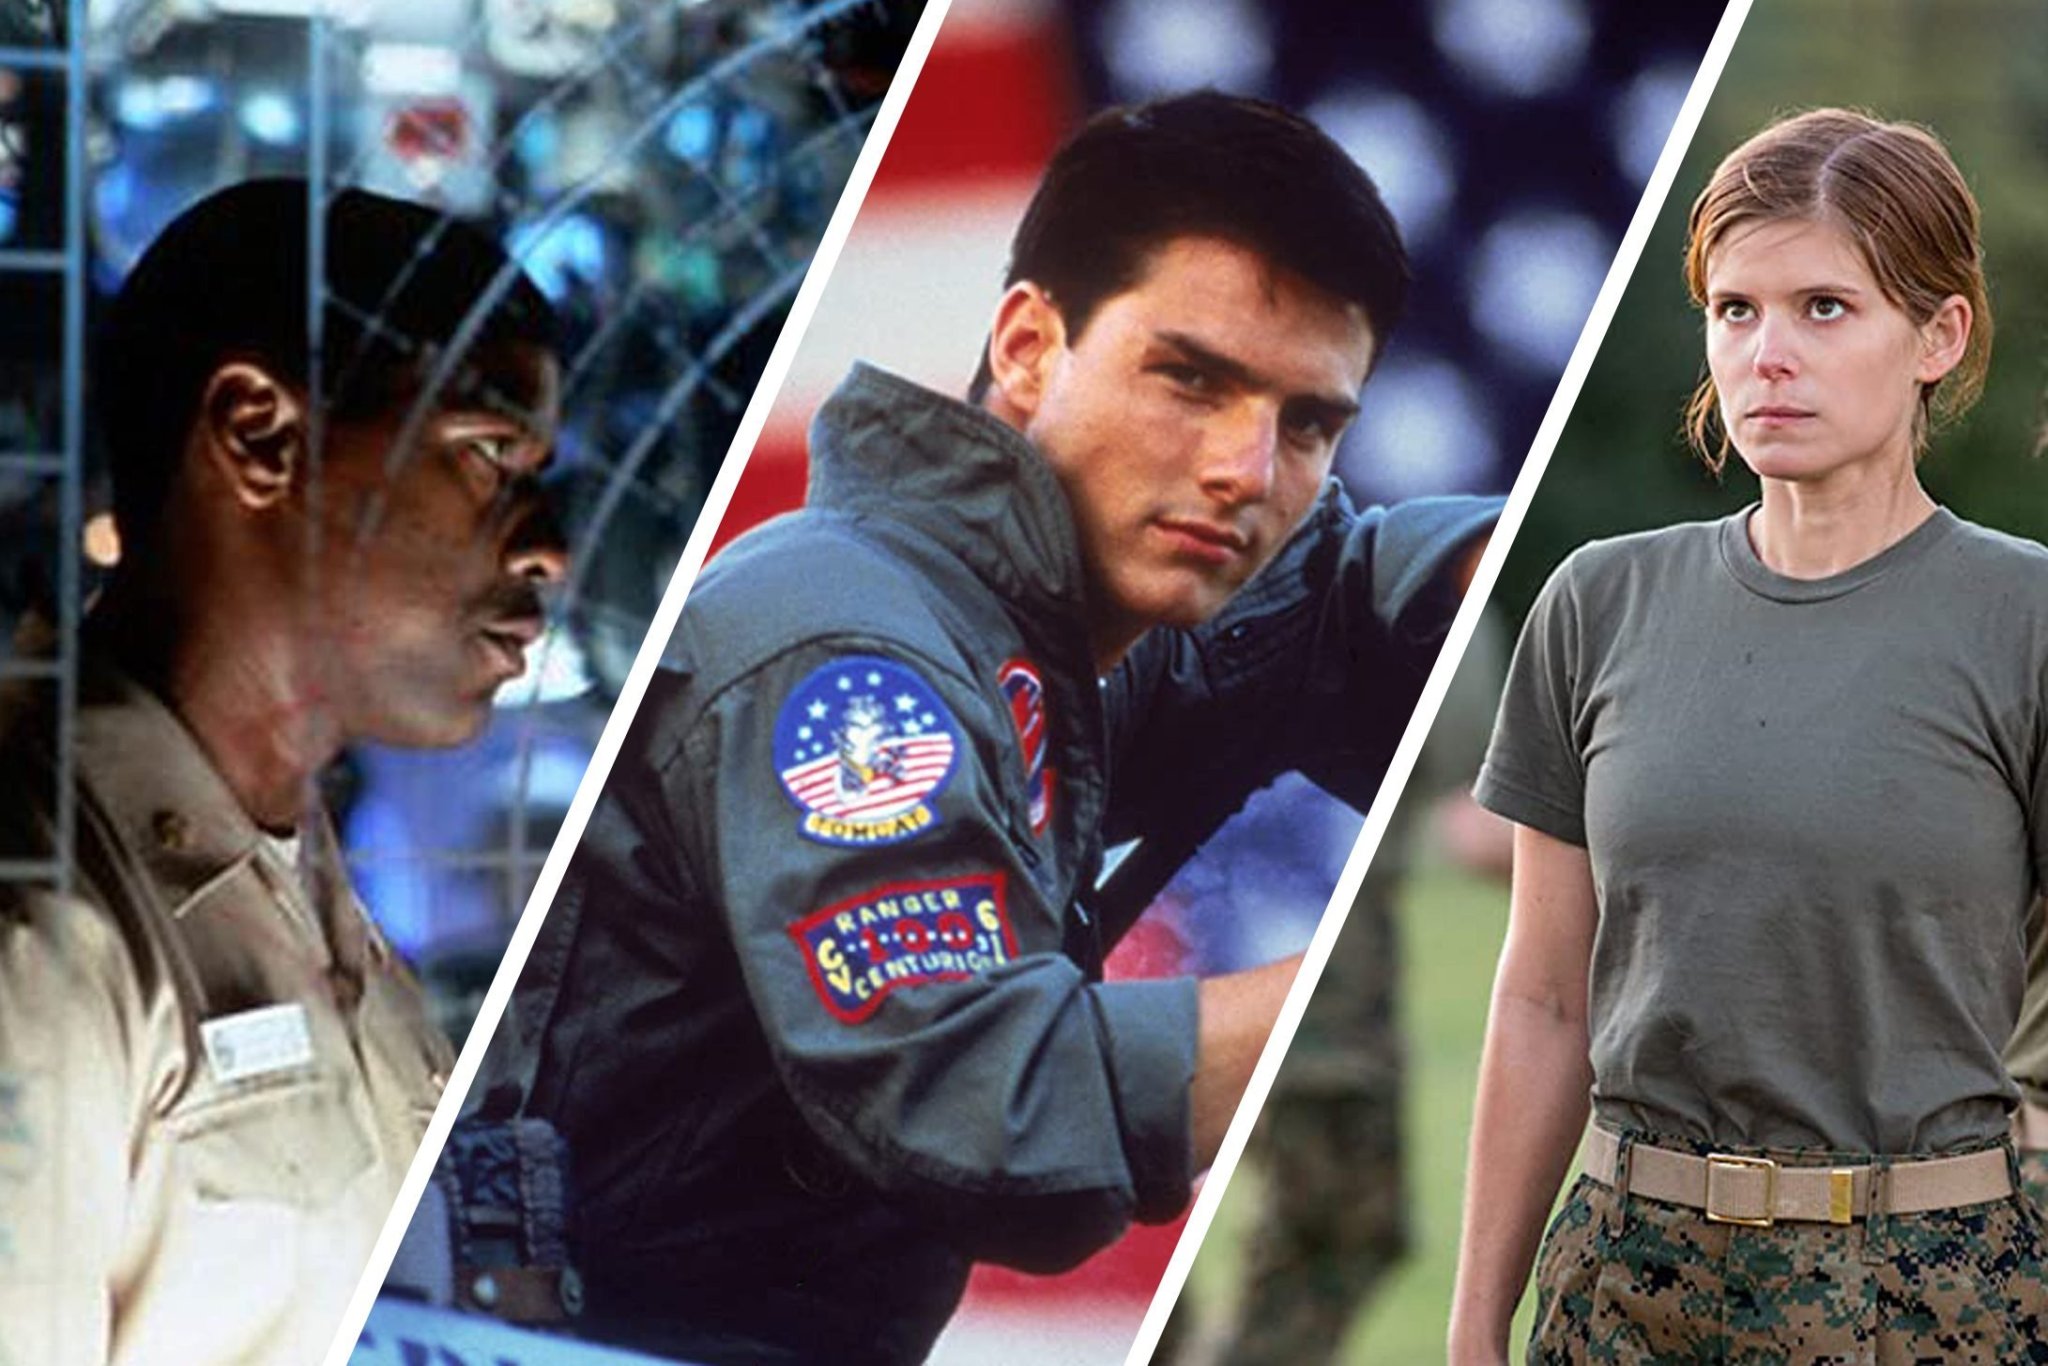 25 Best Memorial Day Movies to Commemorate the Holiday